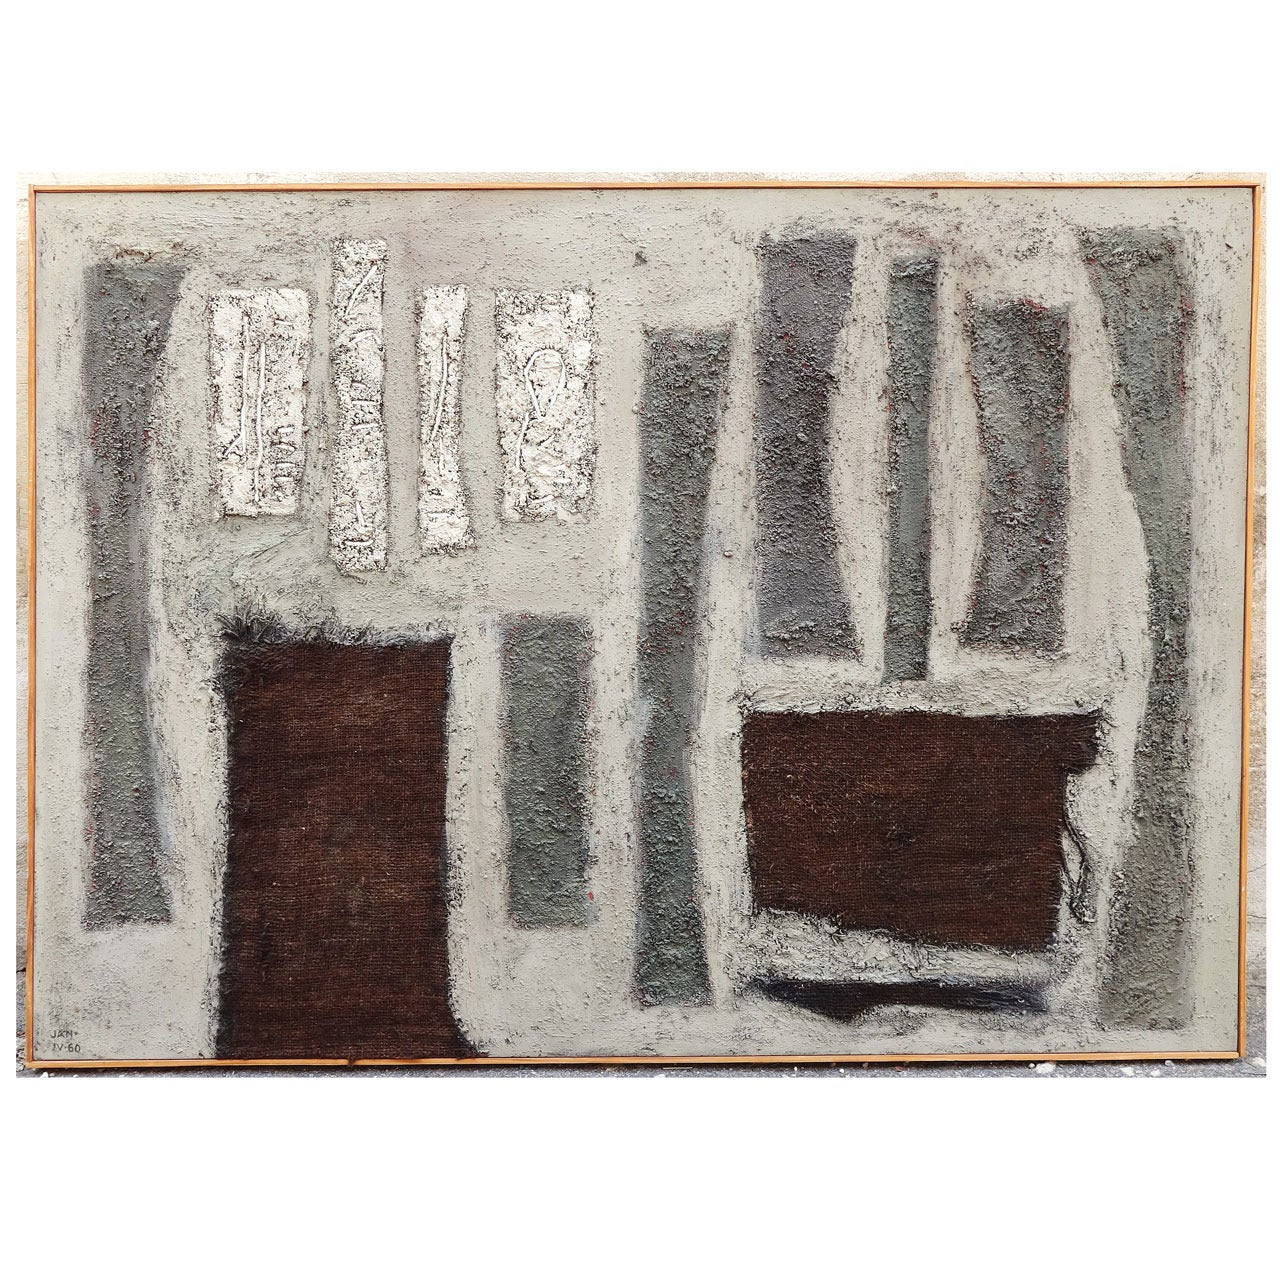 Large Abstract Jan Schreuder (1904-1964) Mixed Media Painting, 1960